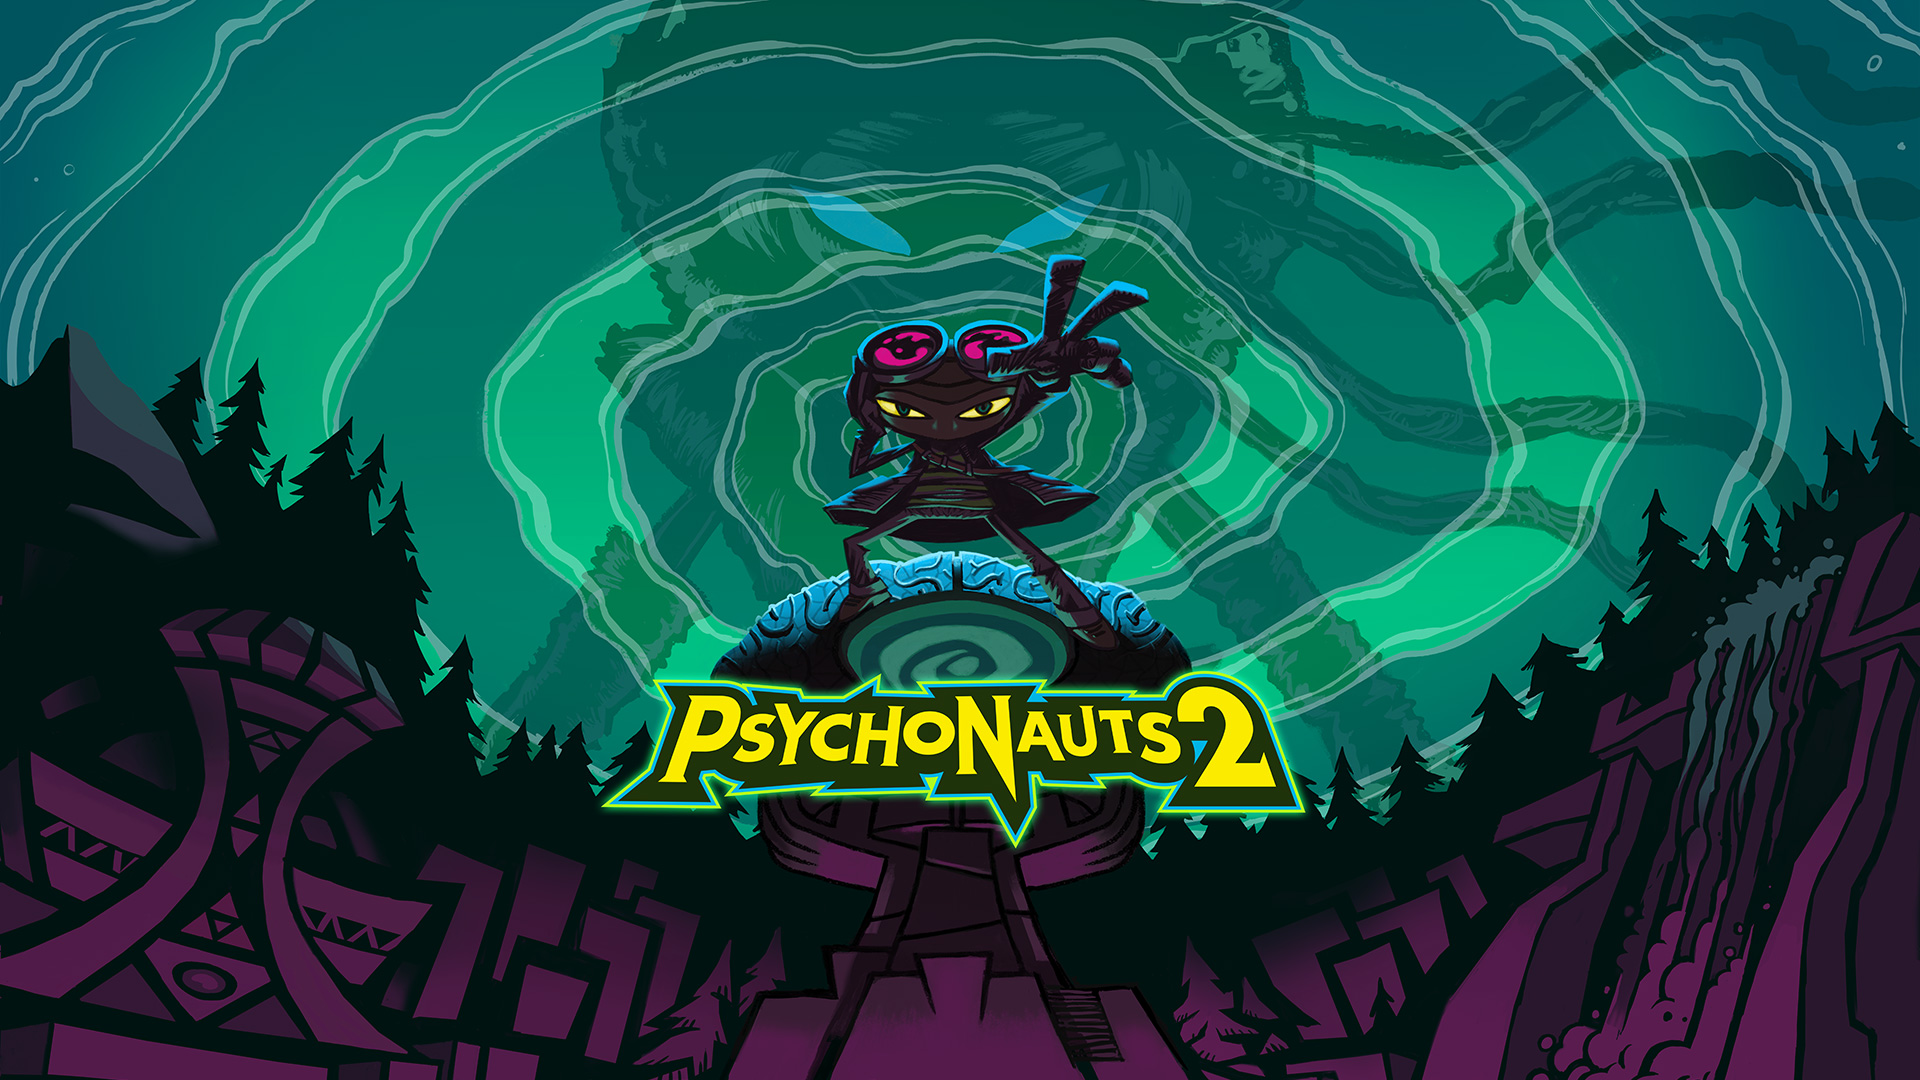 Video For Psychonauts 2 Is Now Available For Digital Pre-order And Pre-download On Xbox One And Xbox Series X|S